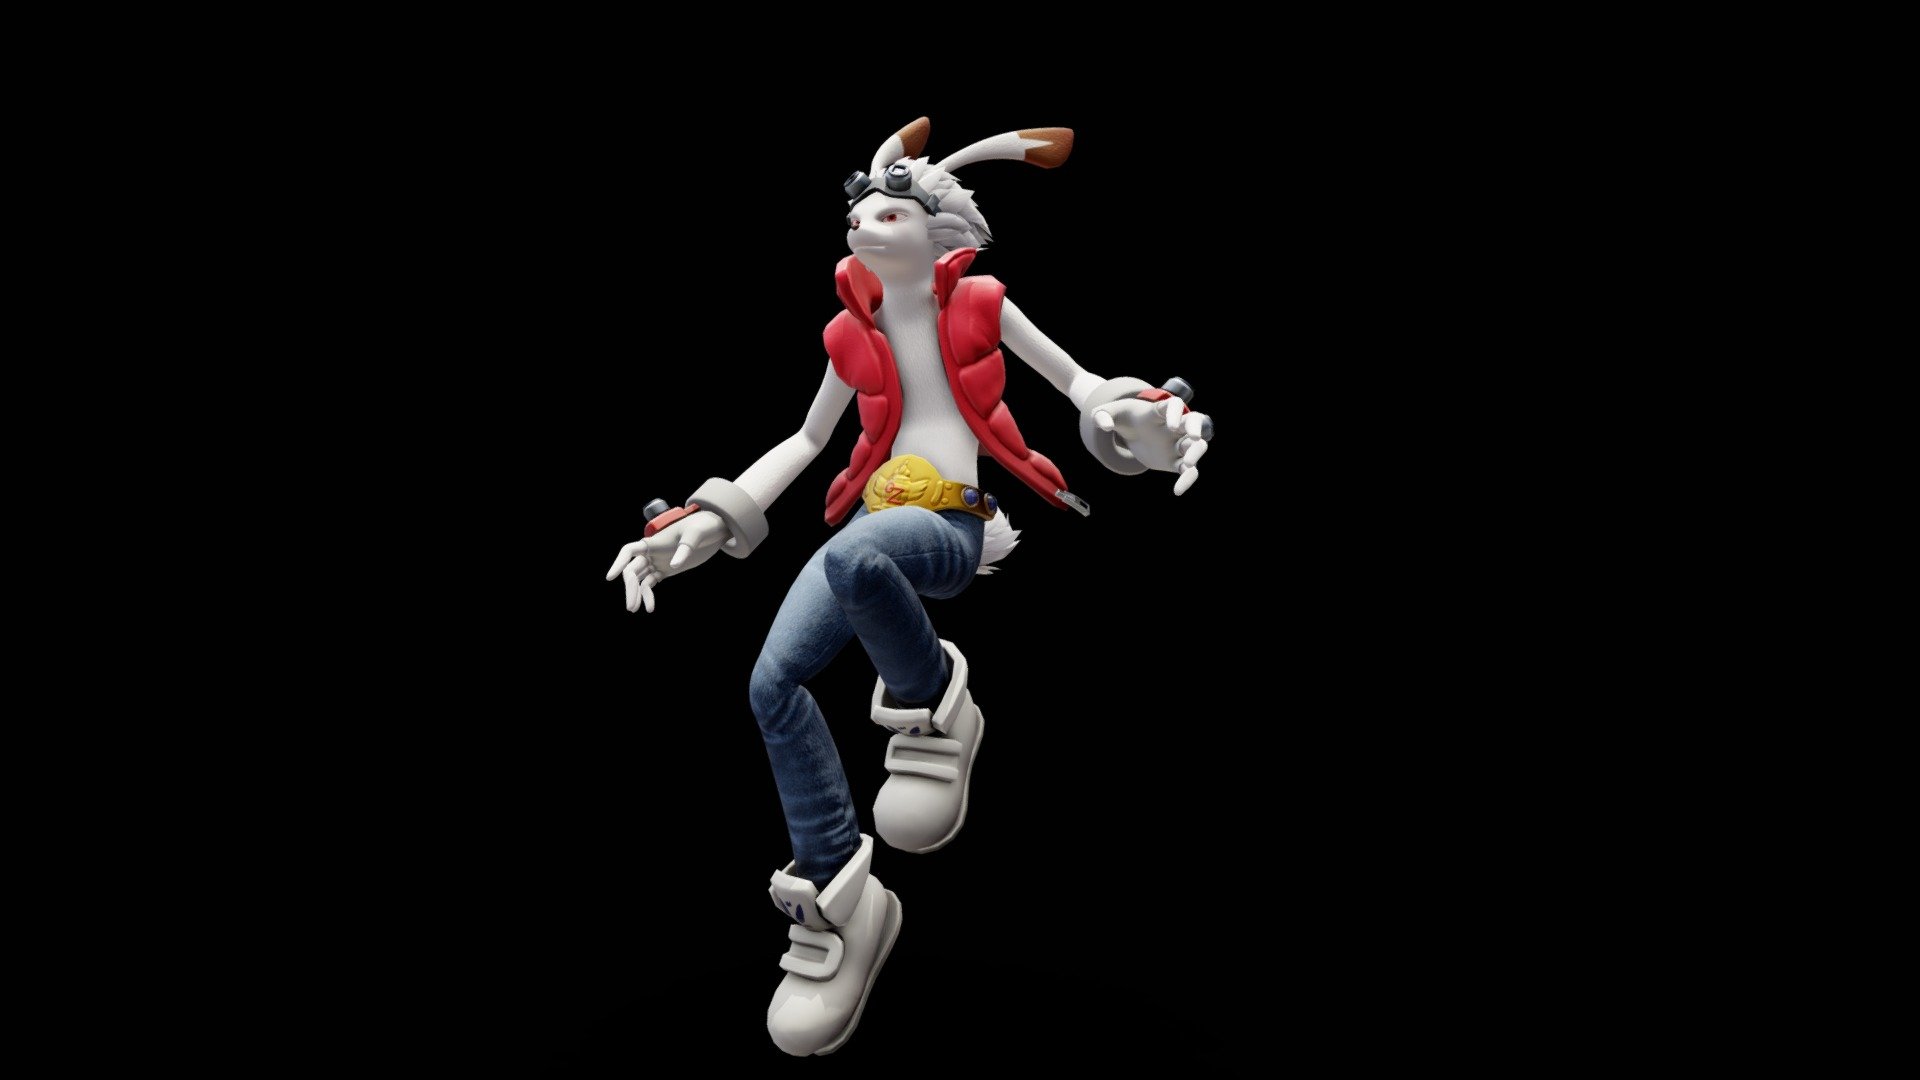 A VRChat avatar based on King Kazma from the movie Summer Wars!
Everything was made on Blender, from sculpting to texturing.

All the files are available on my gumroad (gumroad com / dayckan) - King Kazma - 3D model by Dayckan 3d model